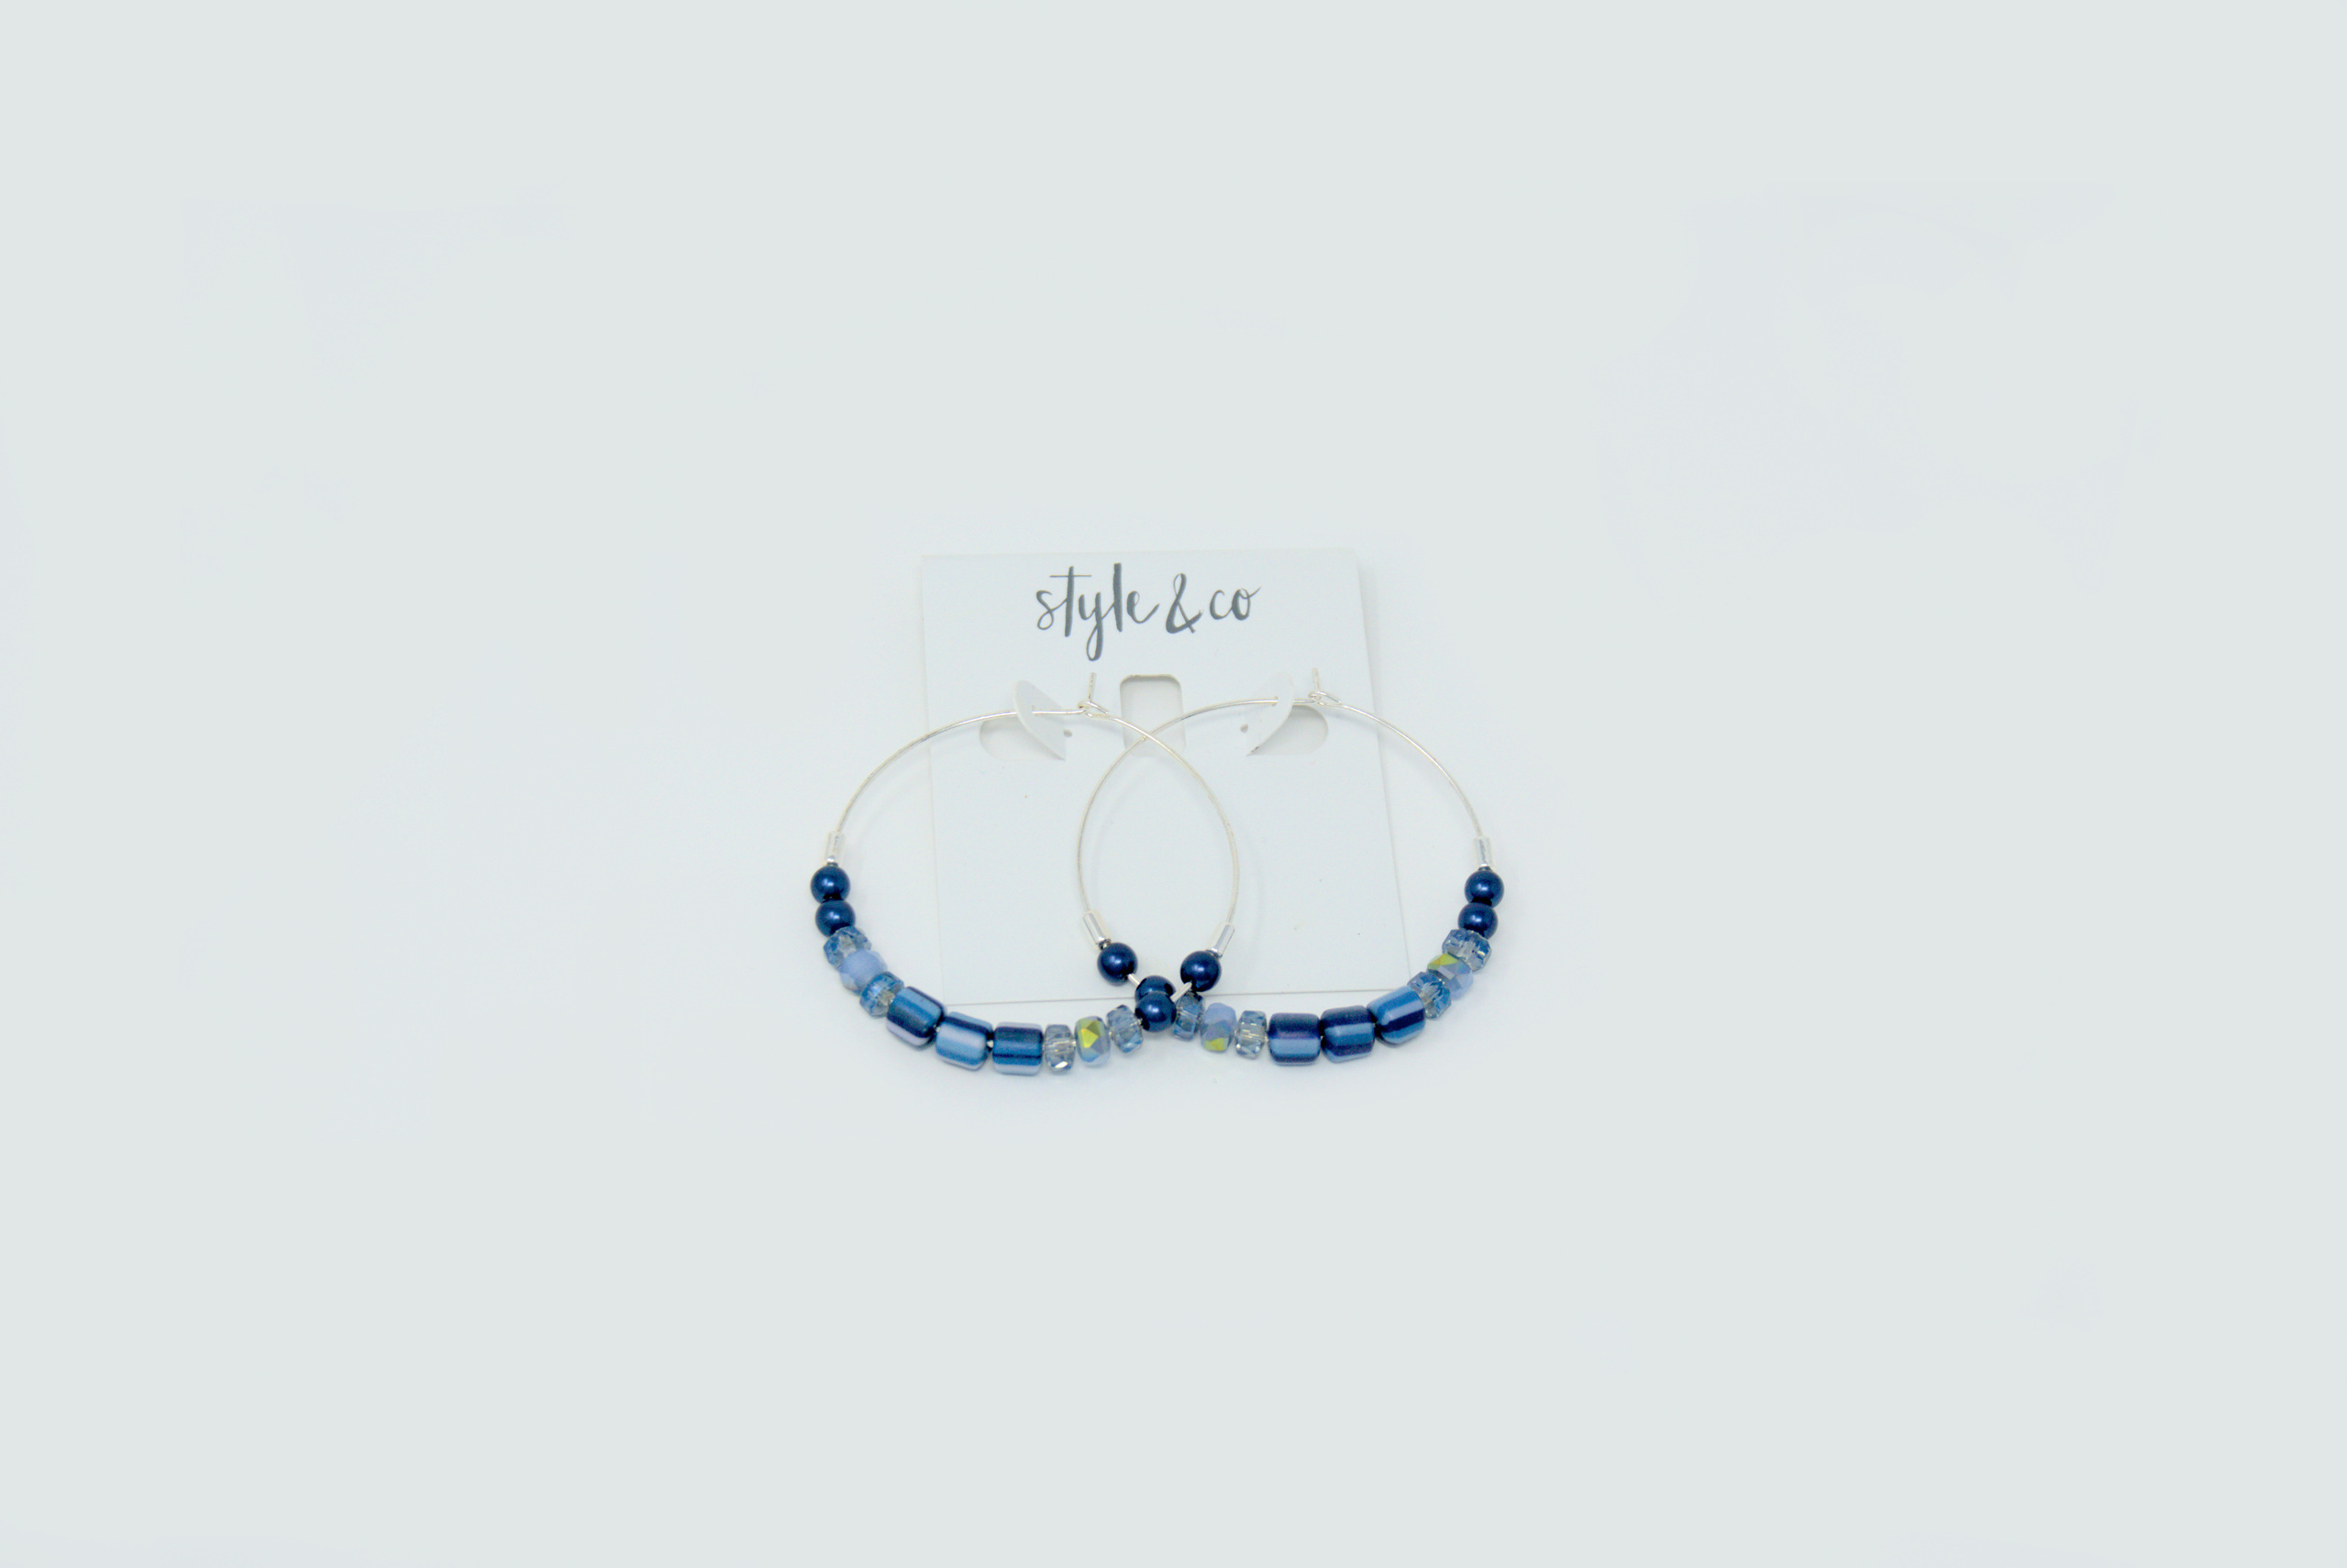 Charm & Lovely Quality Fashion Accessories introduces Style & Co. Blue Colored Beads Oval Hoop Earrings